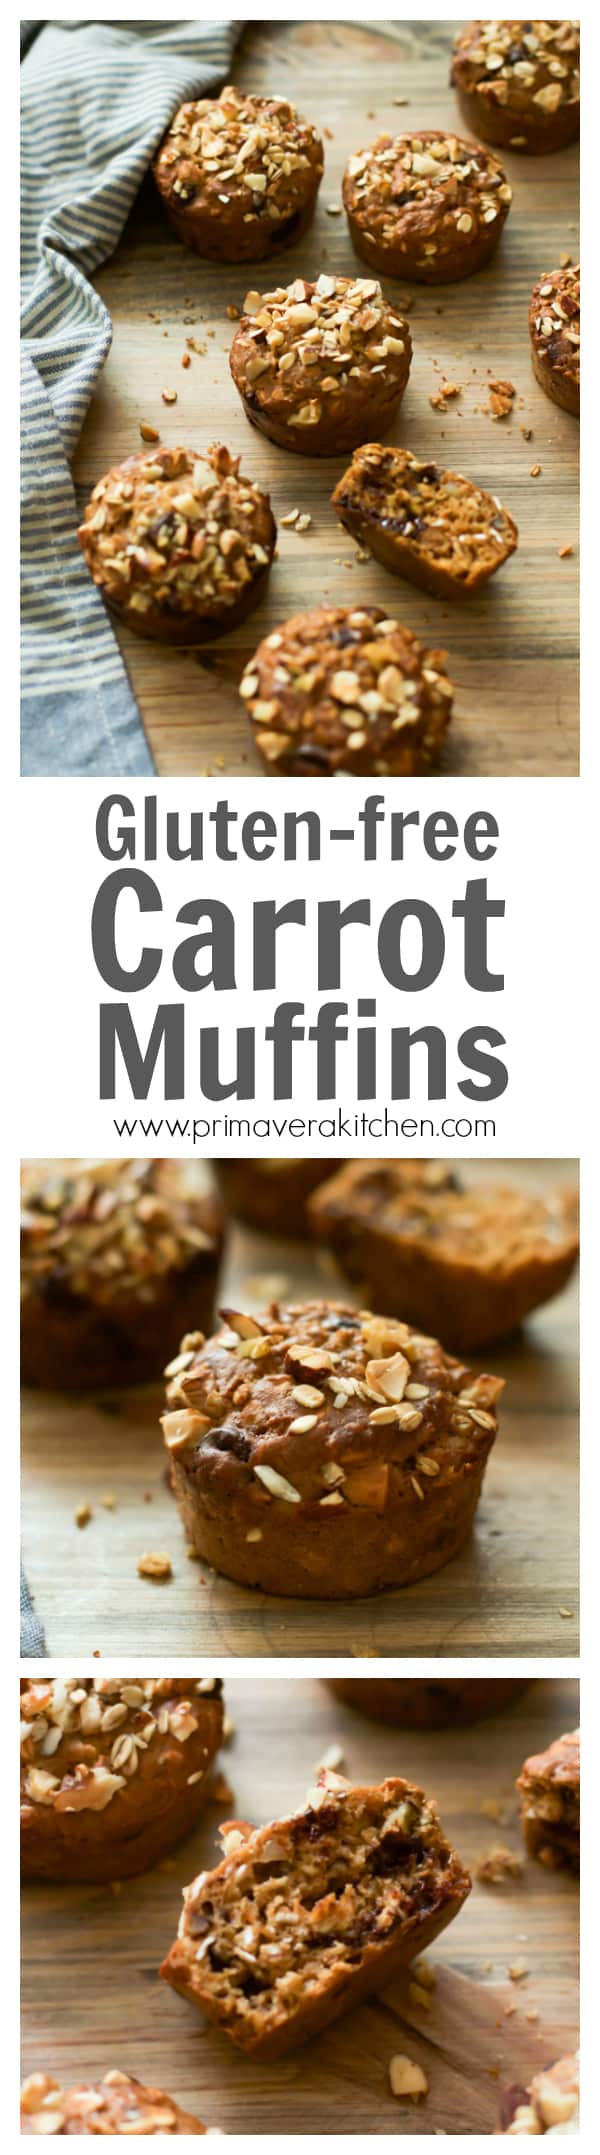 gluten-free-carrot-muffins - These Gluten-free Carrot Muffins are made with rice flour, rolled oats, no butter or oil and loaded with carrots, nuts, Greek yogurt and semi-sweet chocolate chips. They are also delicious with a warm cup of coffee!